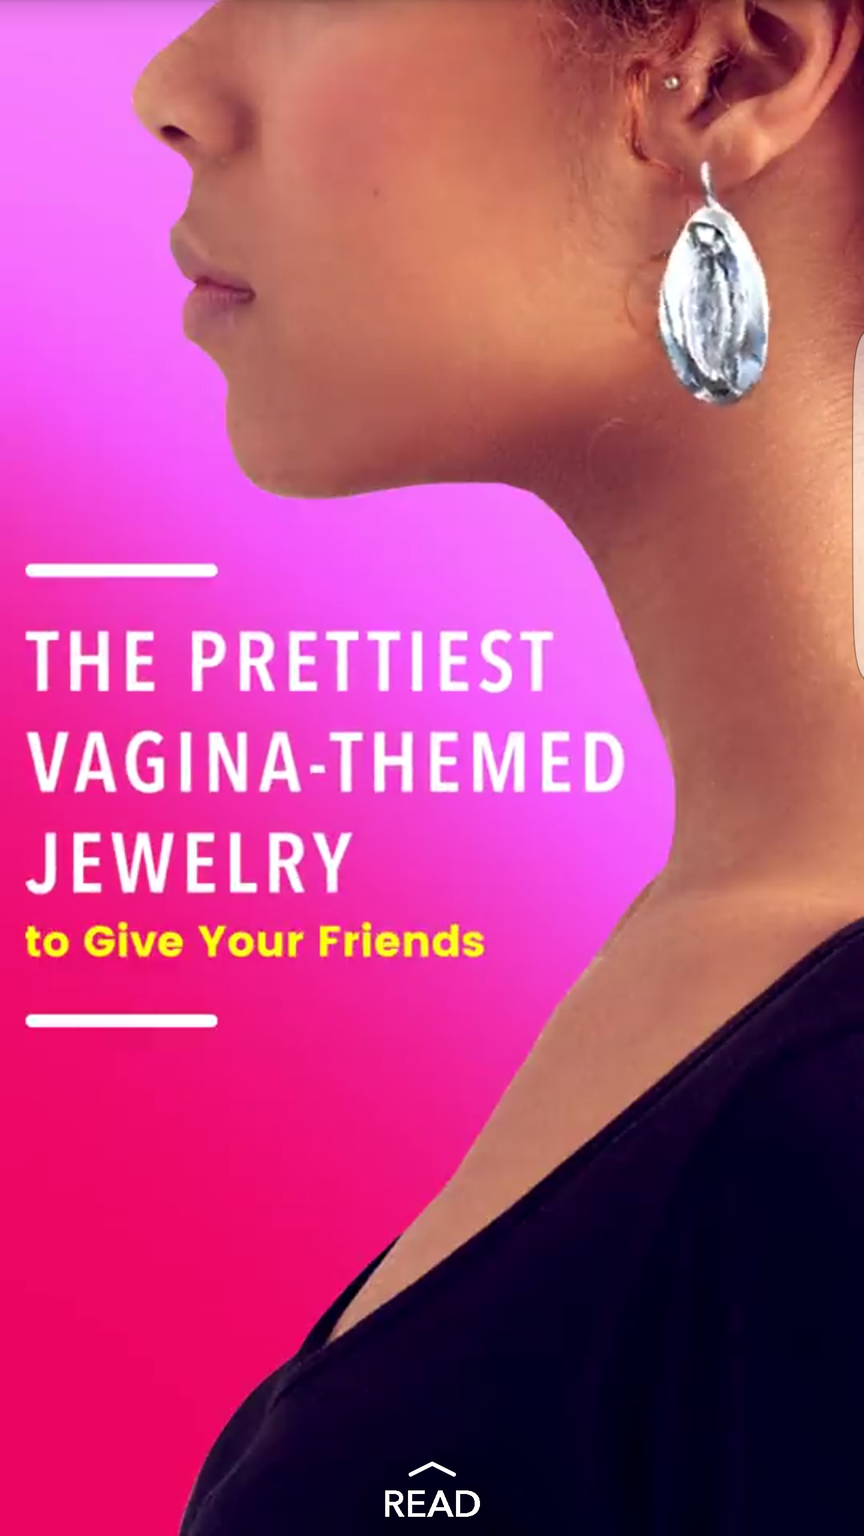 Jewelry that is vagina themed